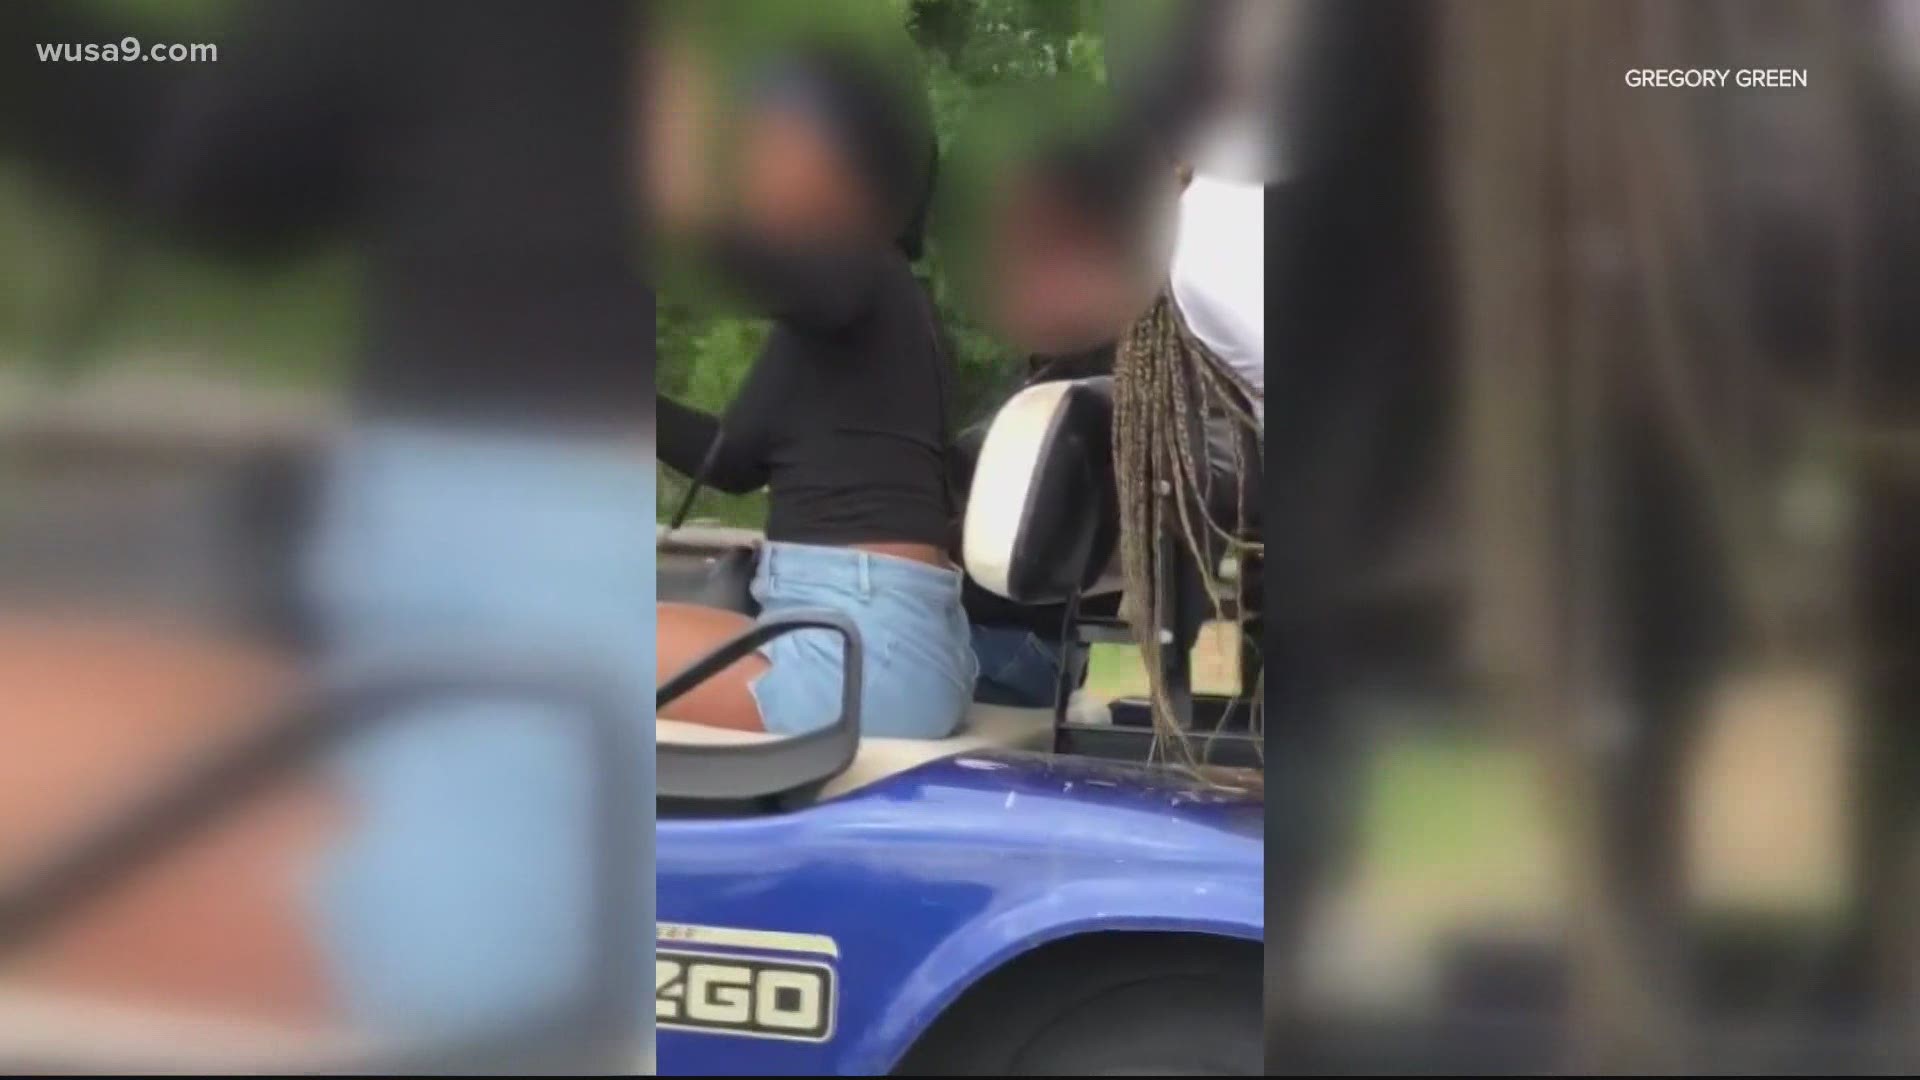 A viral video shows a golf cart cruising down Route 50 in Maryland after the passengers claim to have missed their $35 Lyft ride from Bowie to D.C., video shows.